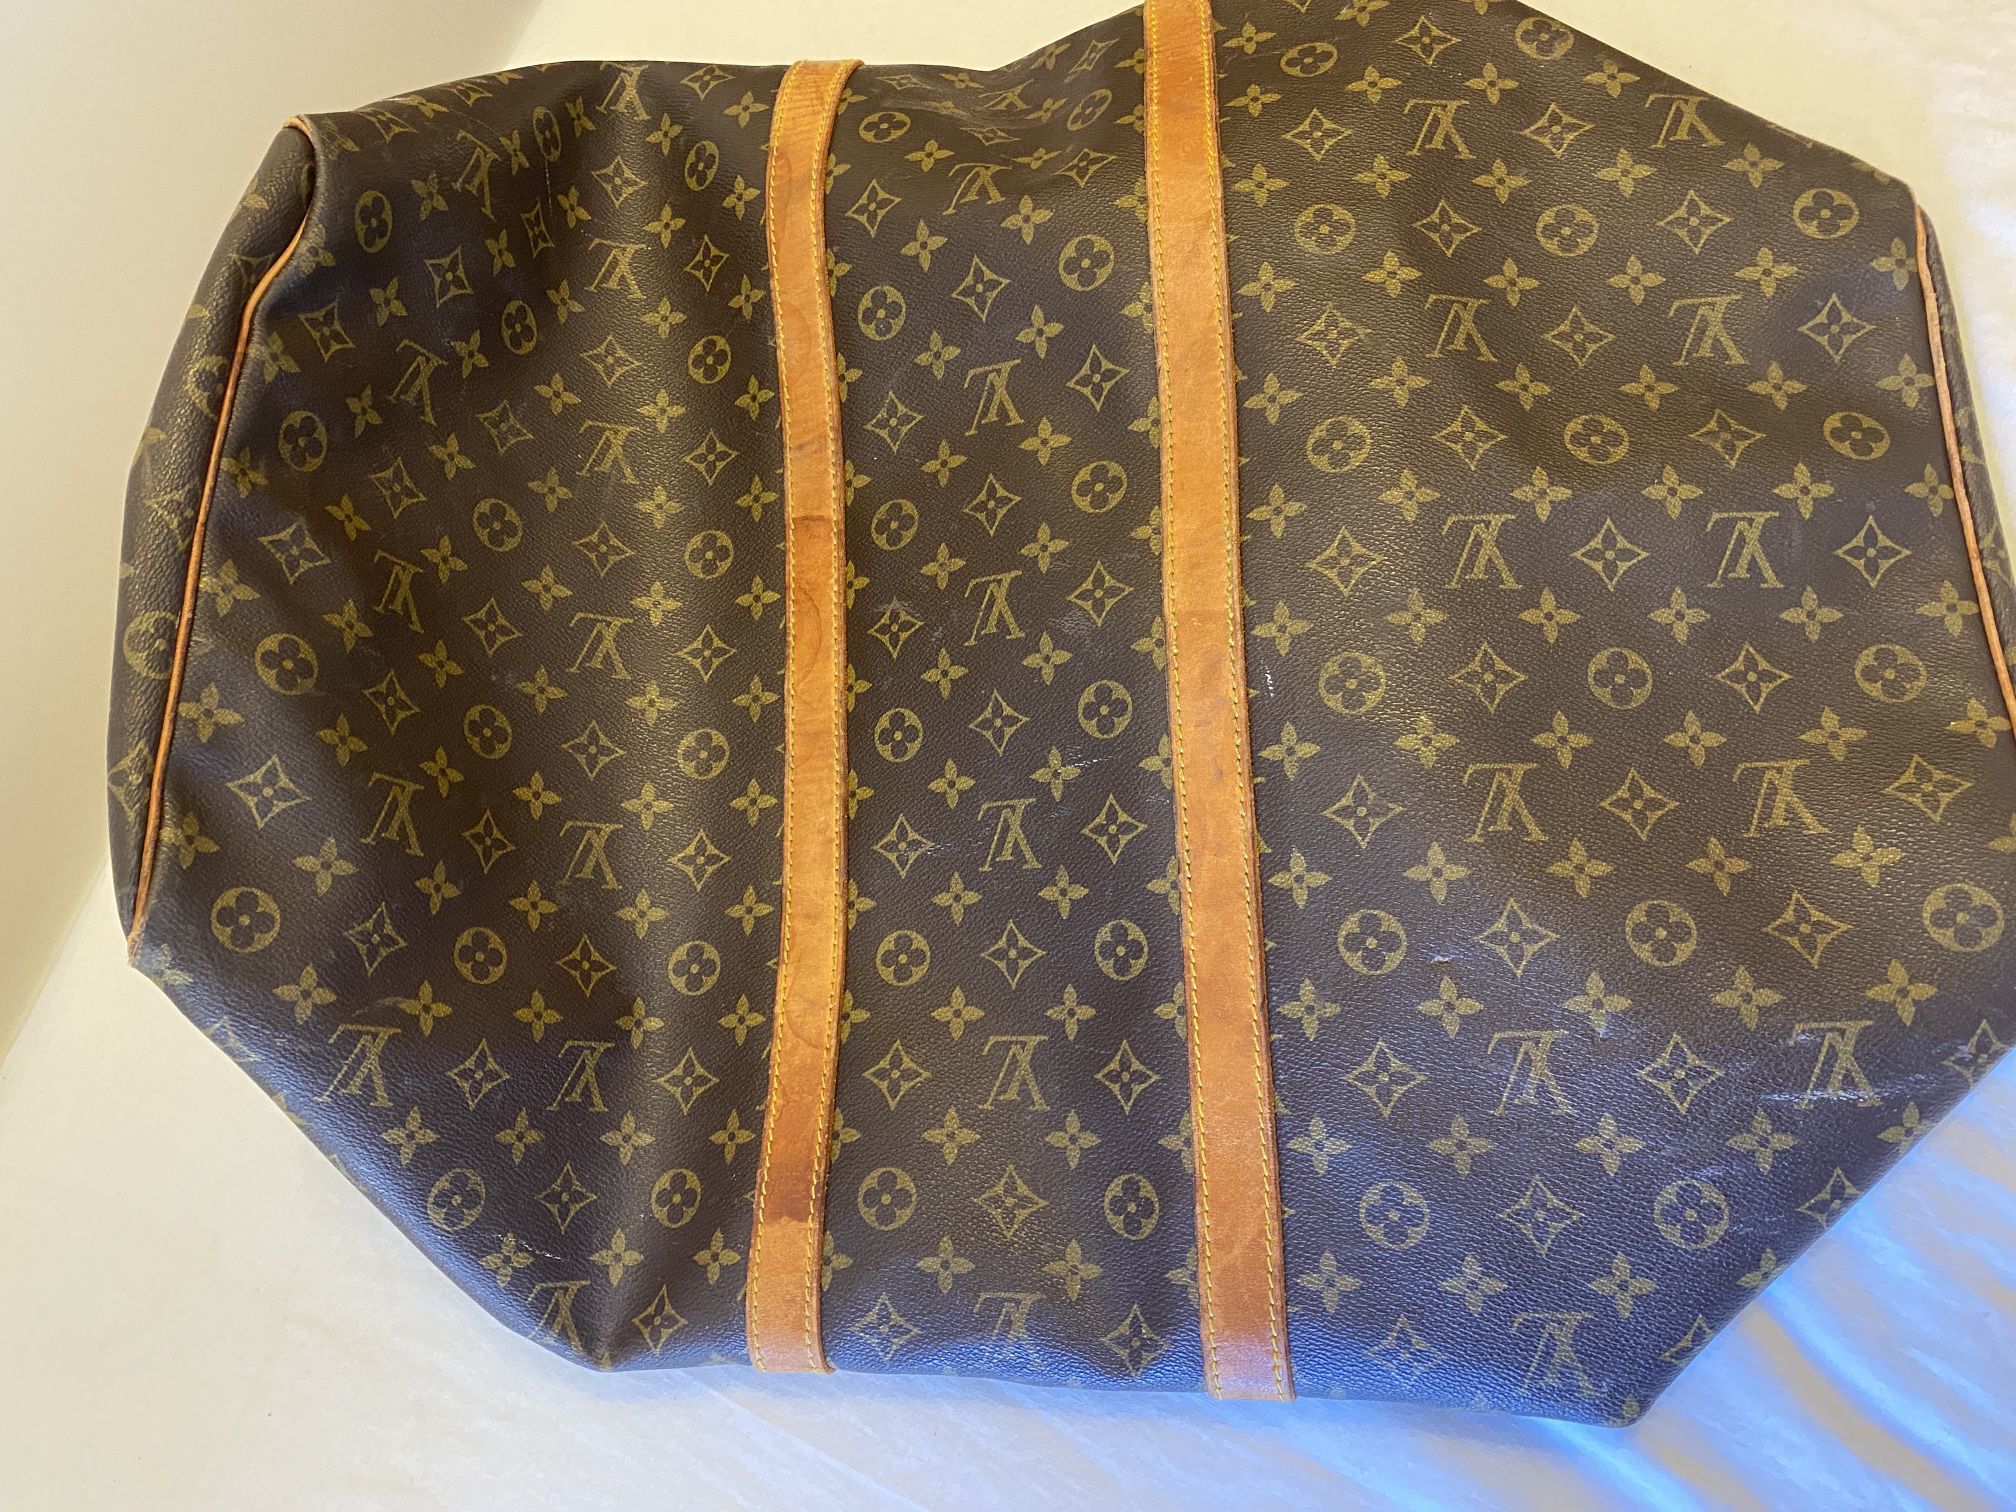 authentic louis vuitton keepall 60 for Sale in Safety Harbor, FL - OfferUp